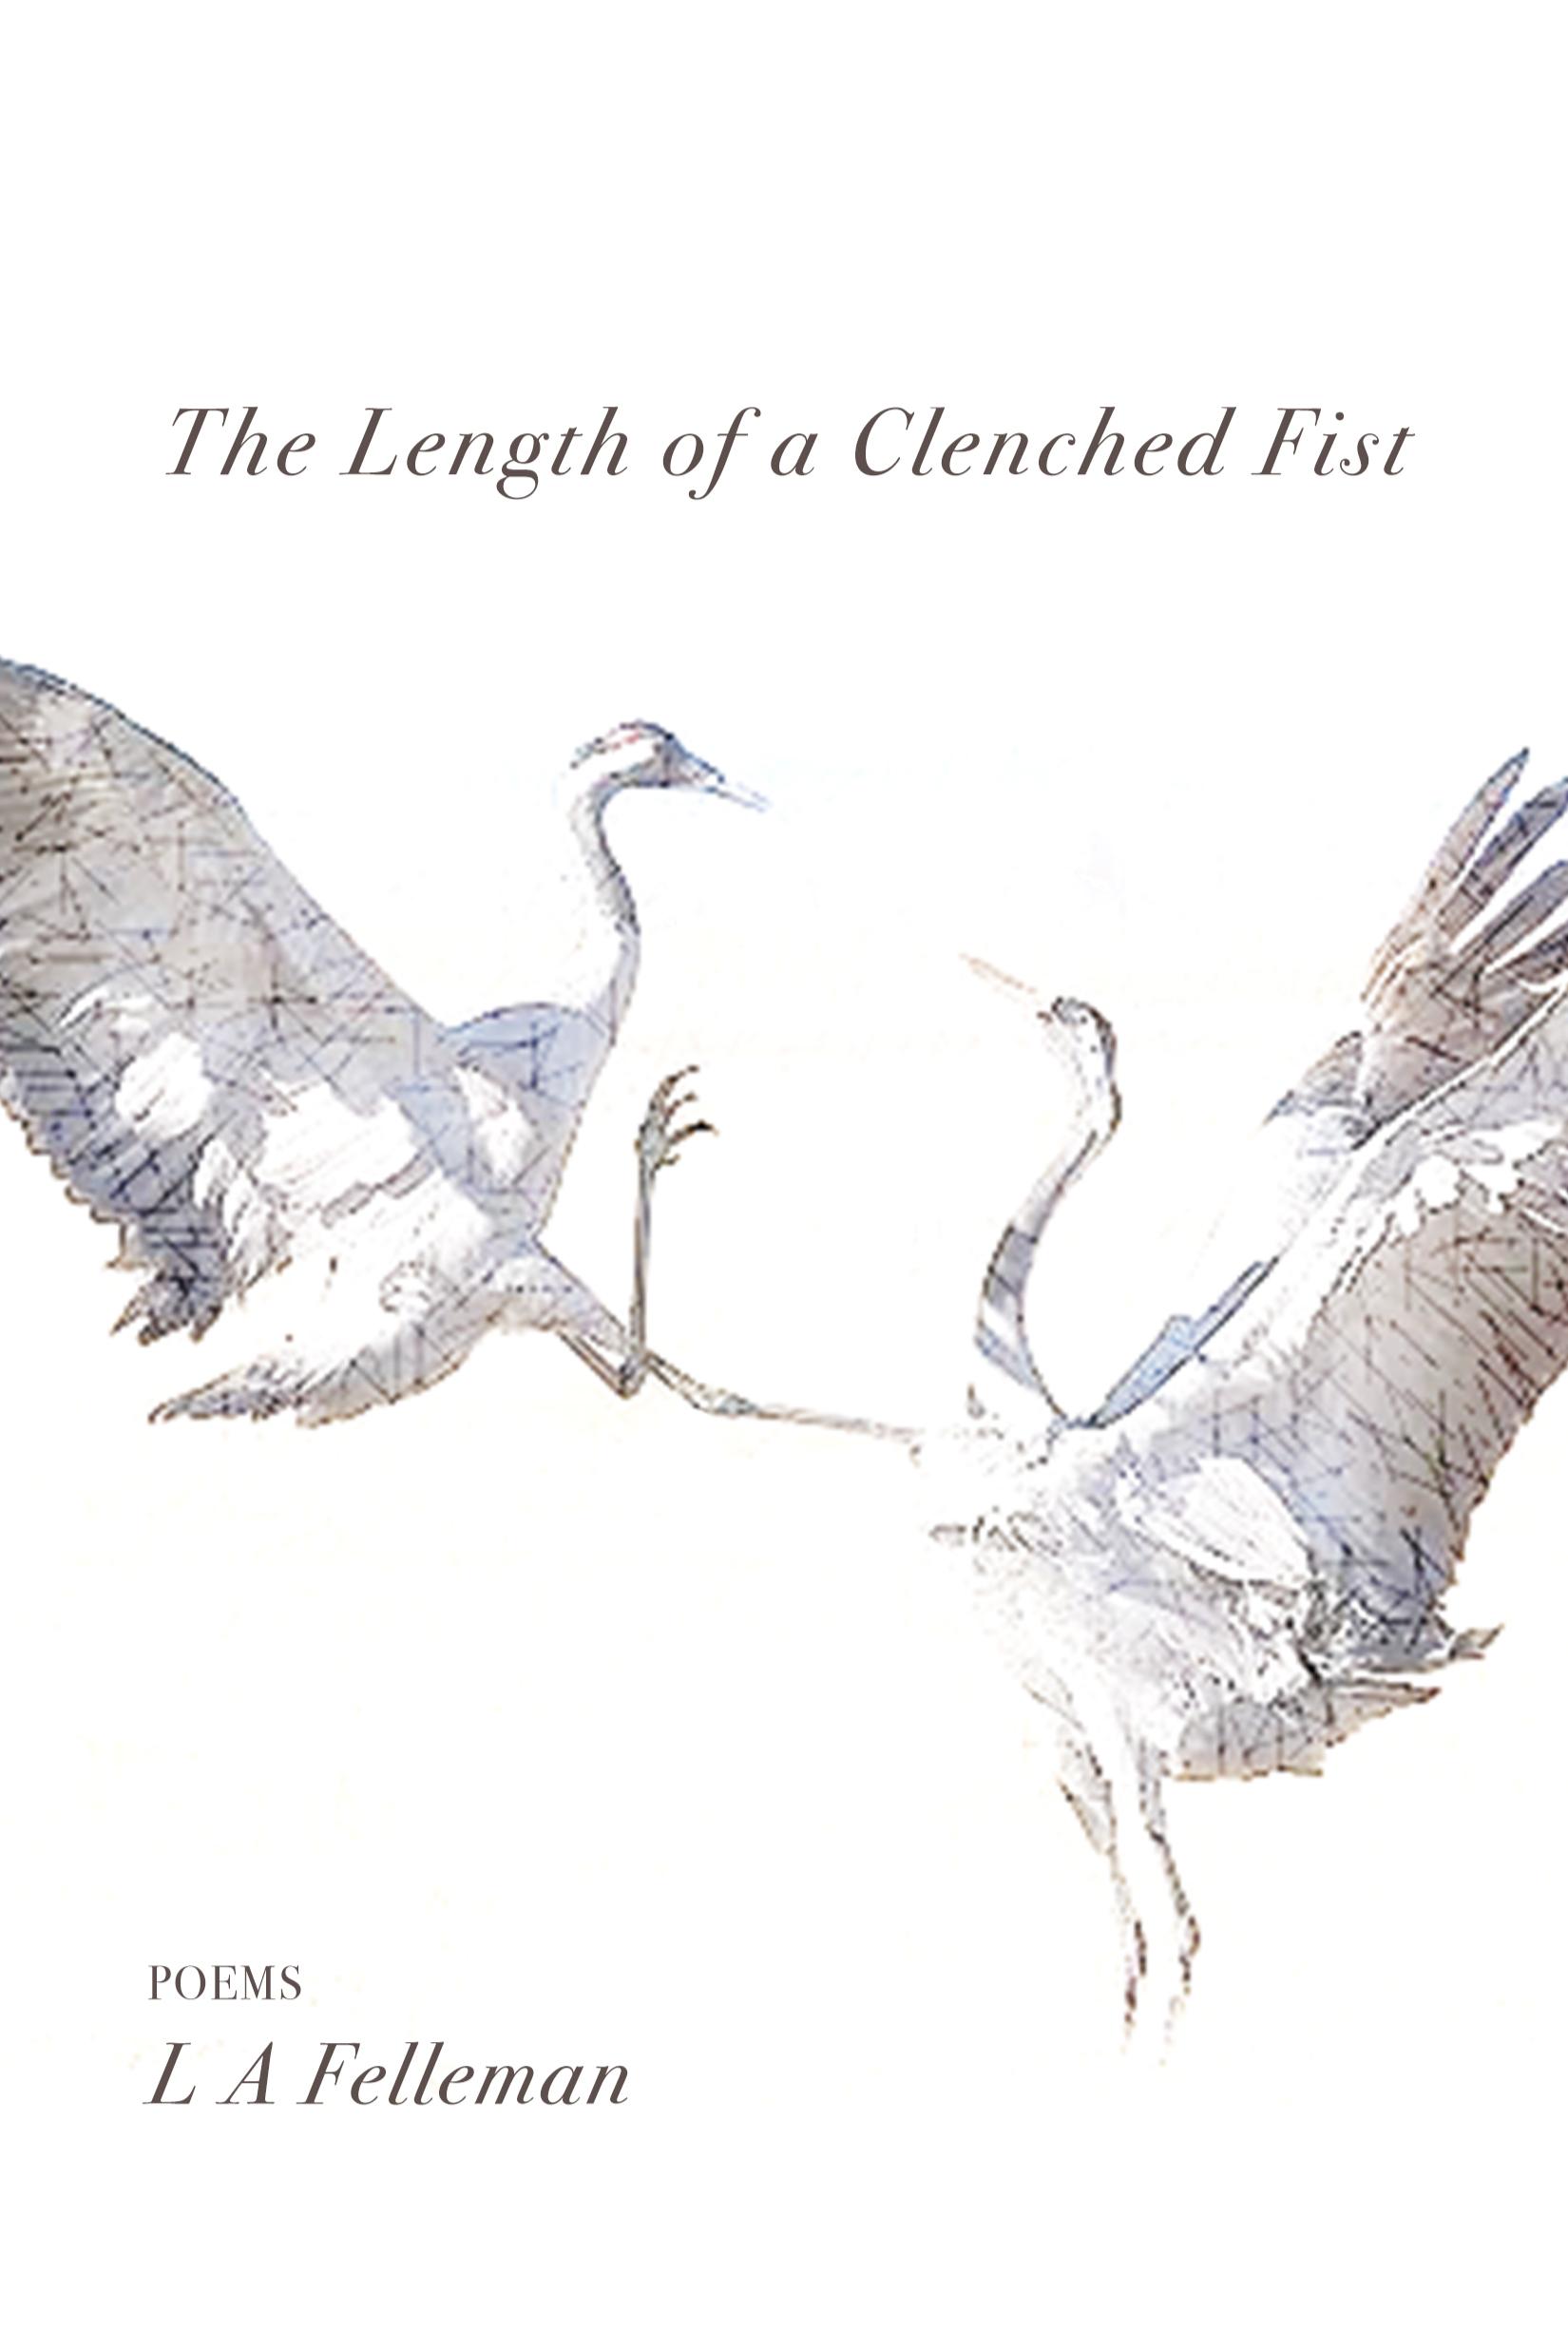 Book cover of The Length of a Clenched Fist by LA Felleman